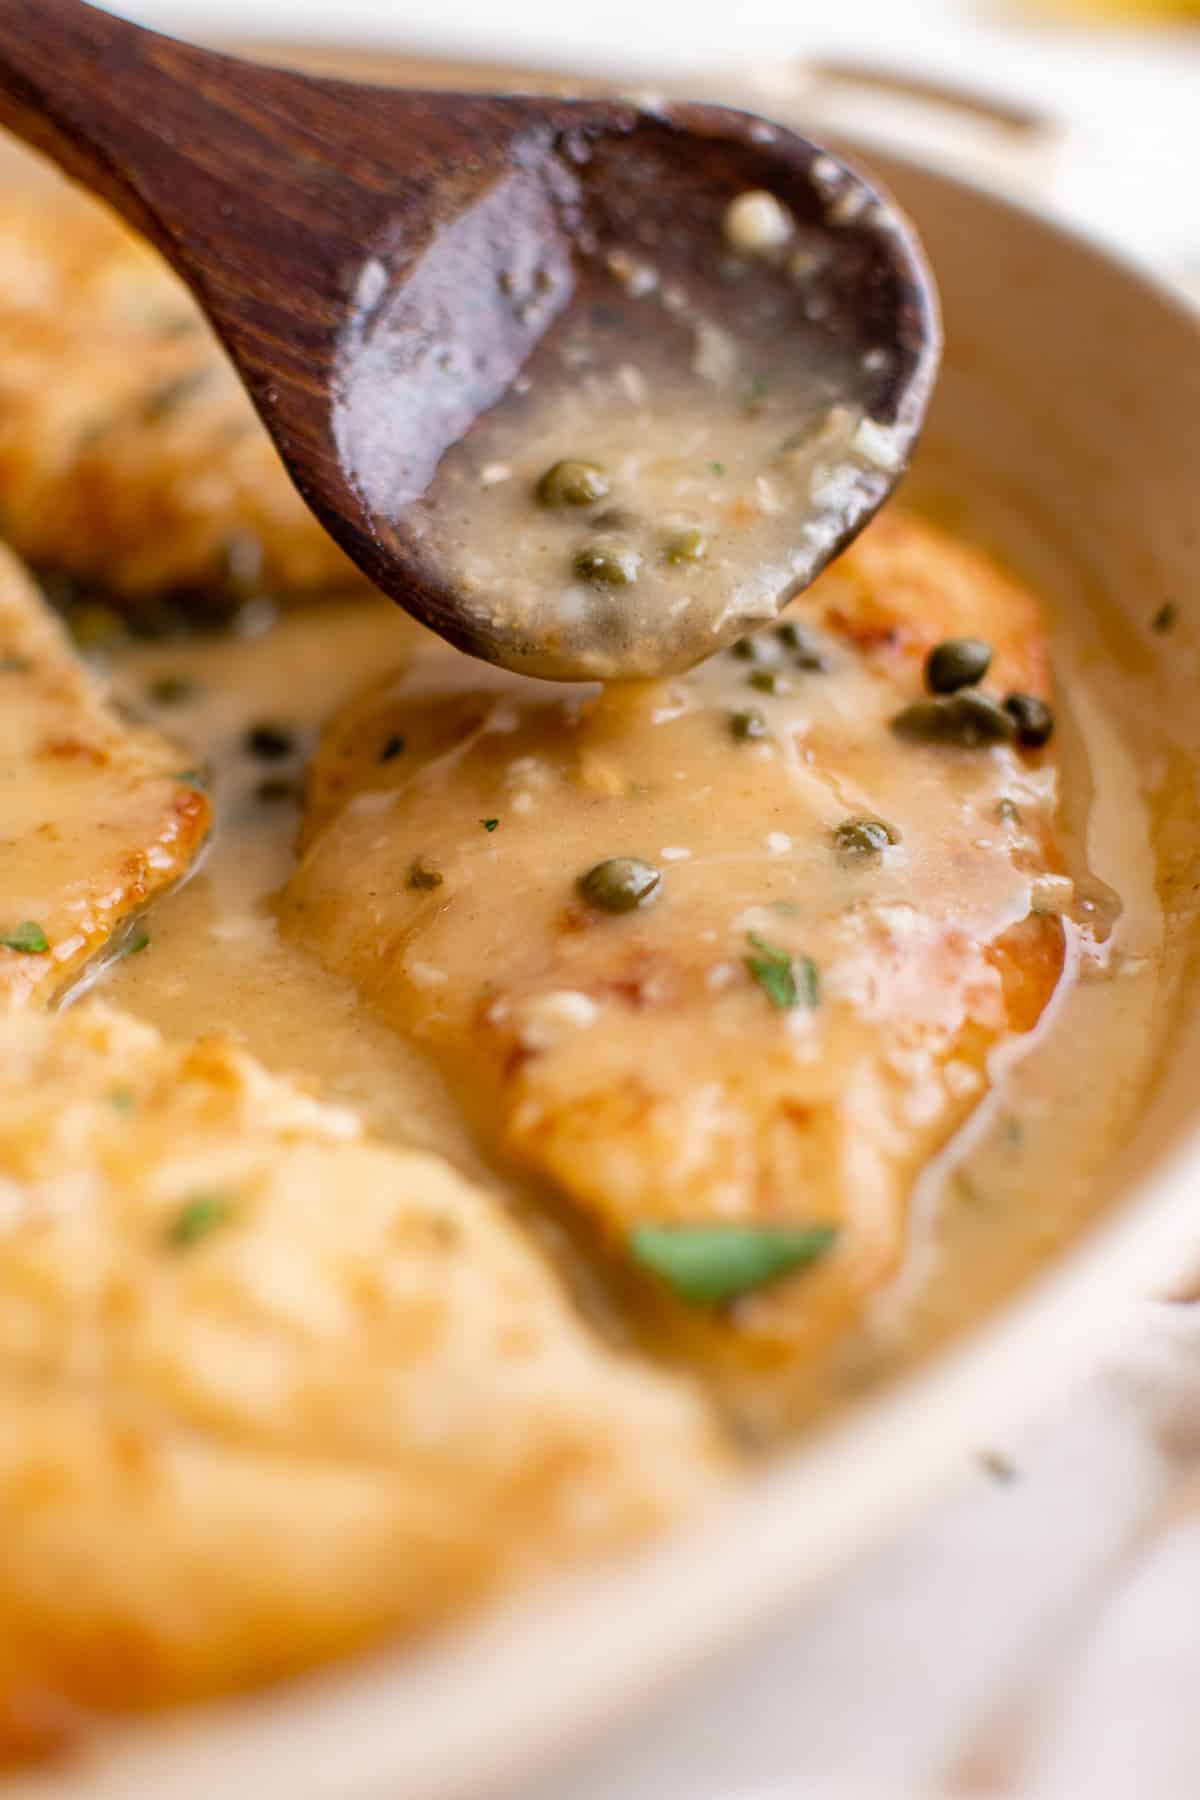 Lemon sauce being drizzled over chicken piccata.